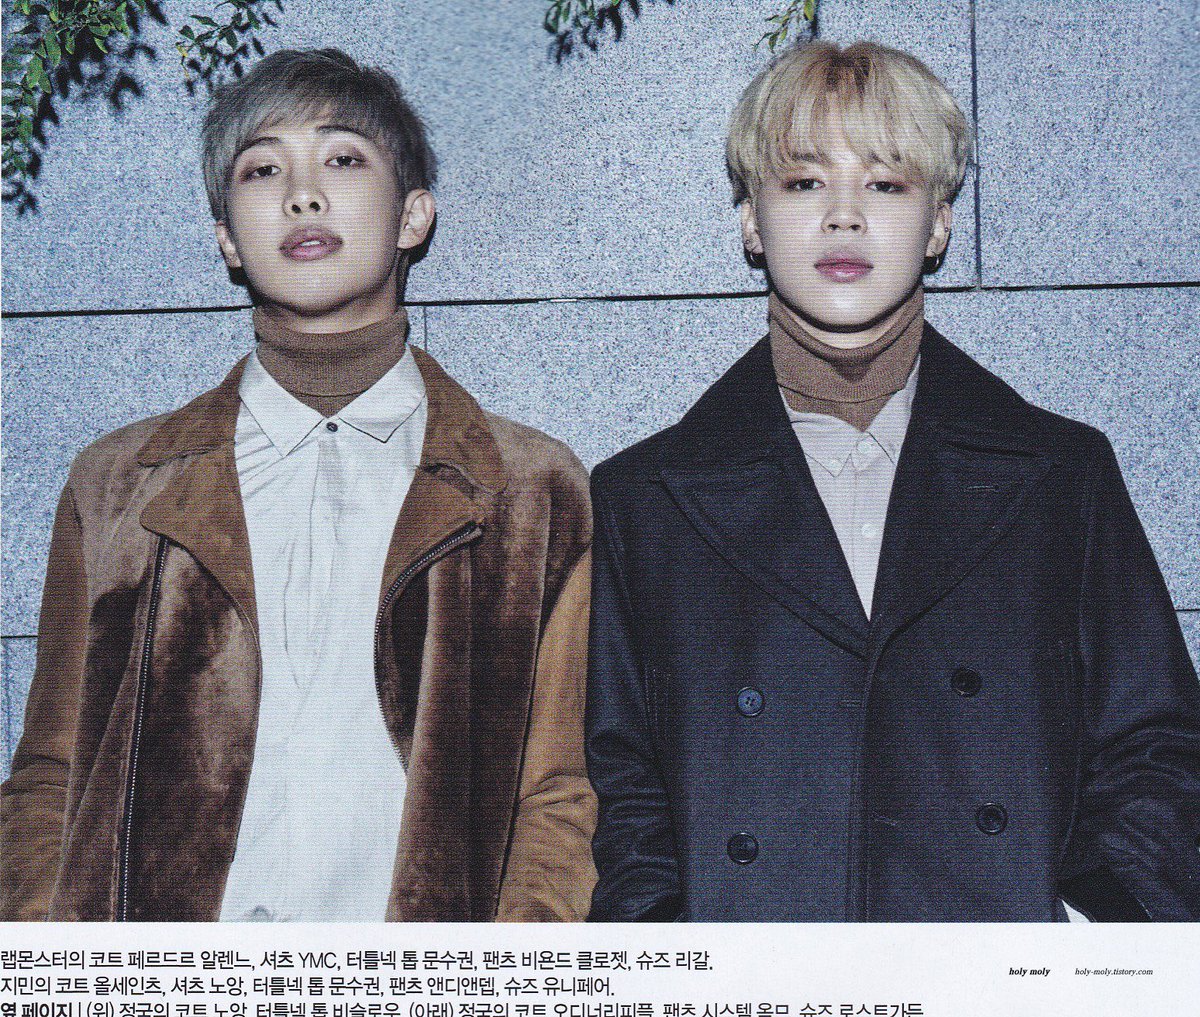 I feel a kind of ´early 19th century’ influence. From the hats, turtle necks and the layering above the turtle necks with shirts and long coats, an ´Oliver Twist’ vibe somehow.The colours,trousers, loose sweaters with turtle necks. And the collar of the coats in fact (Jimin’s).